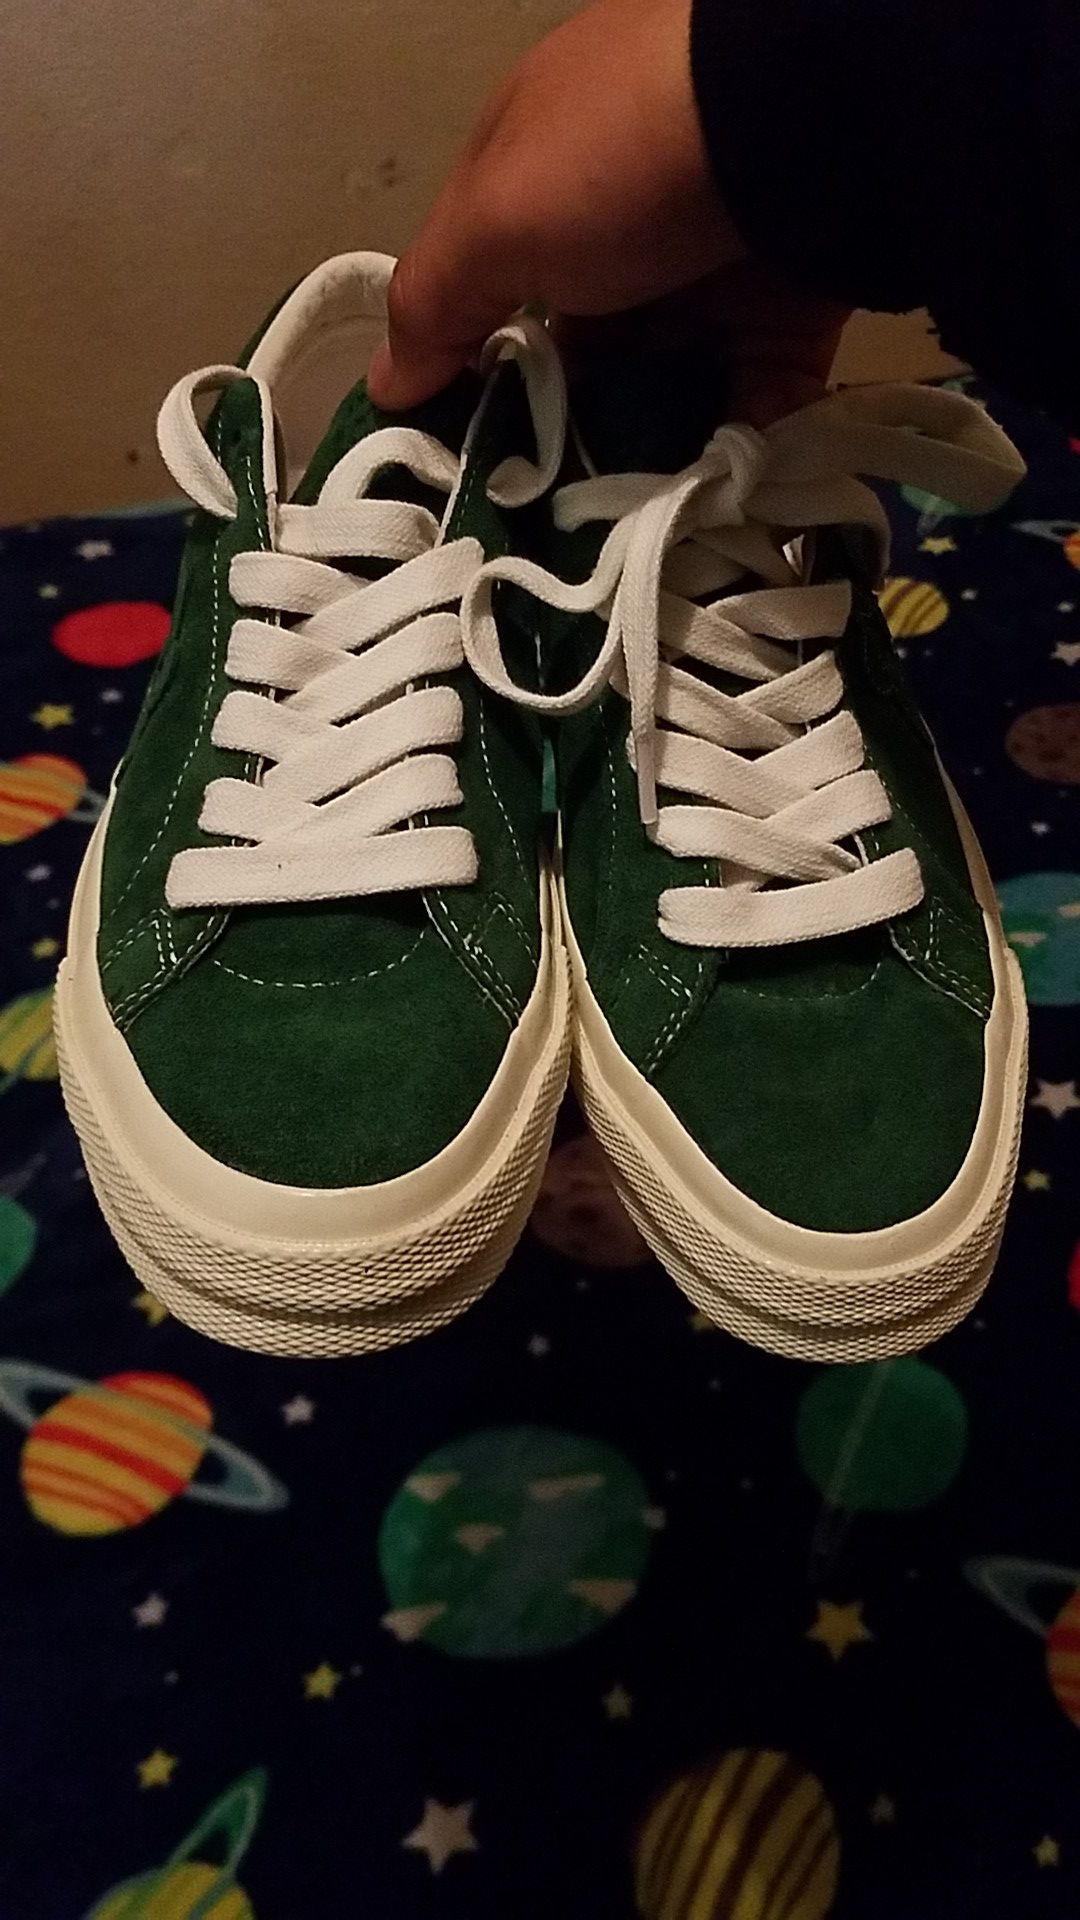 Converse One Star Ox Tyler the Creator Golf Le Fleur Mono (Green) for Sale in Los Angeles, - OfferUp